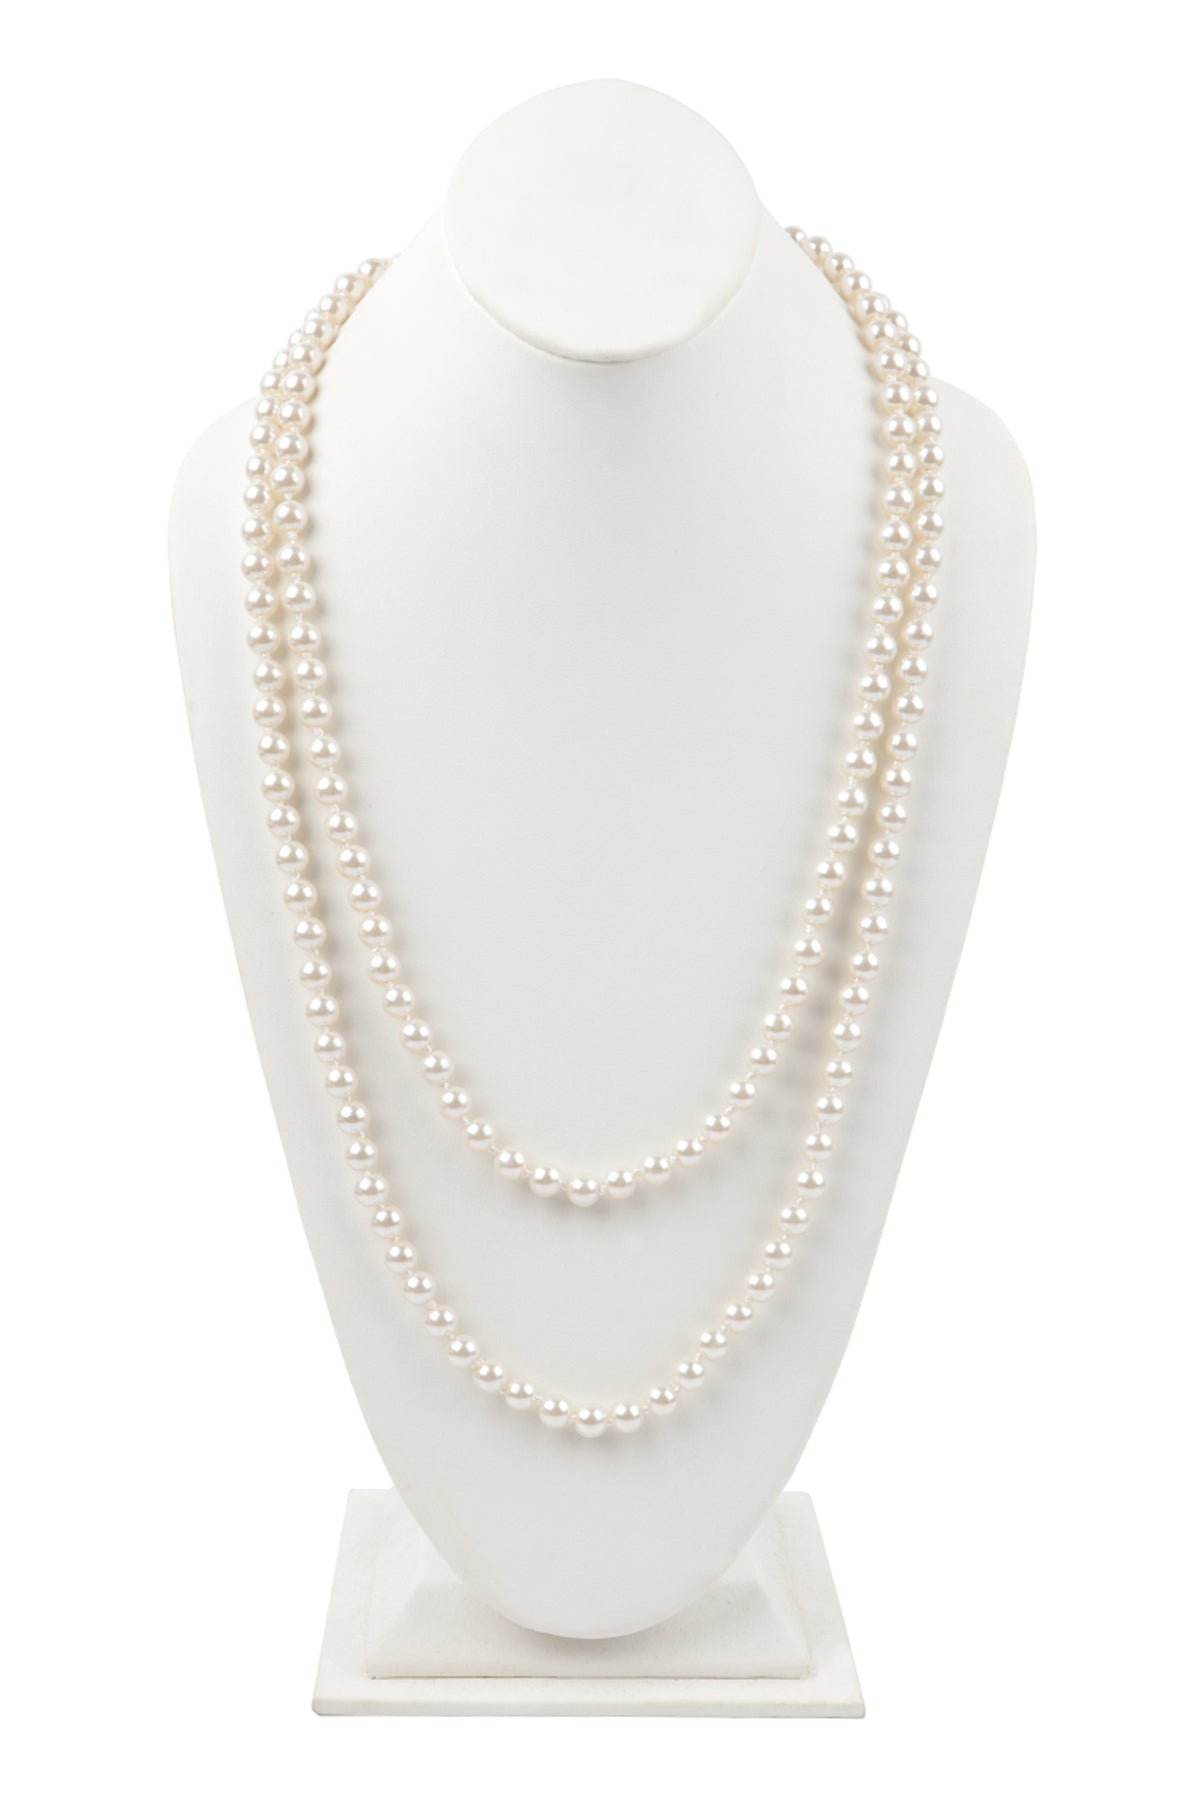 2 LINE PEARL BEADS LONG NECKLACE-CREAM